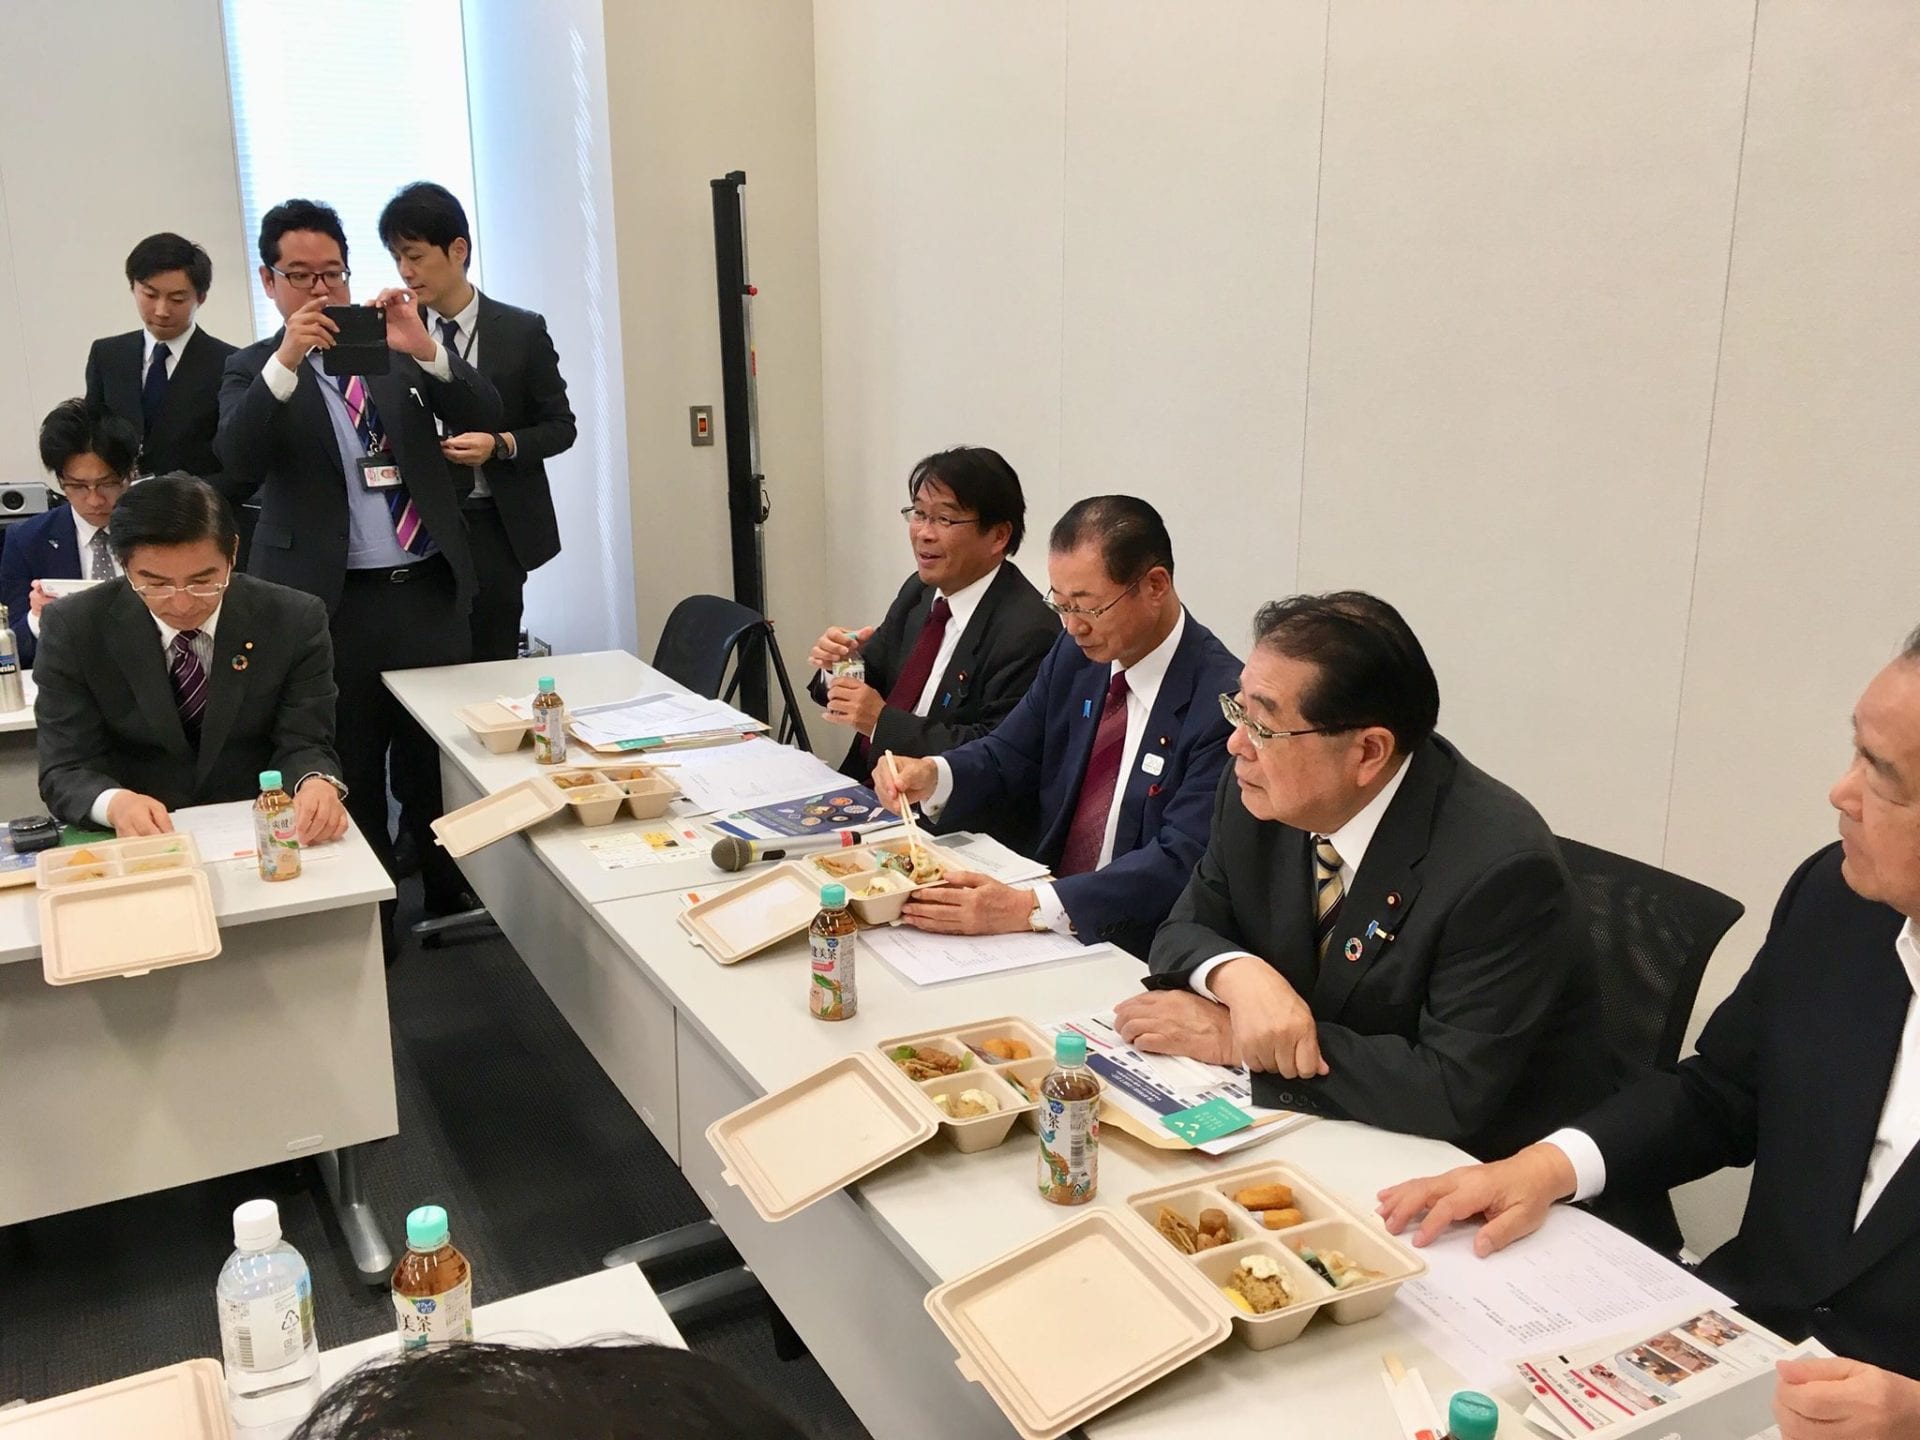 MPs arranging a meat free bonanza at Tokyo Olympics - Feature Image